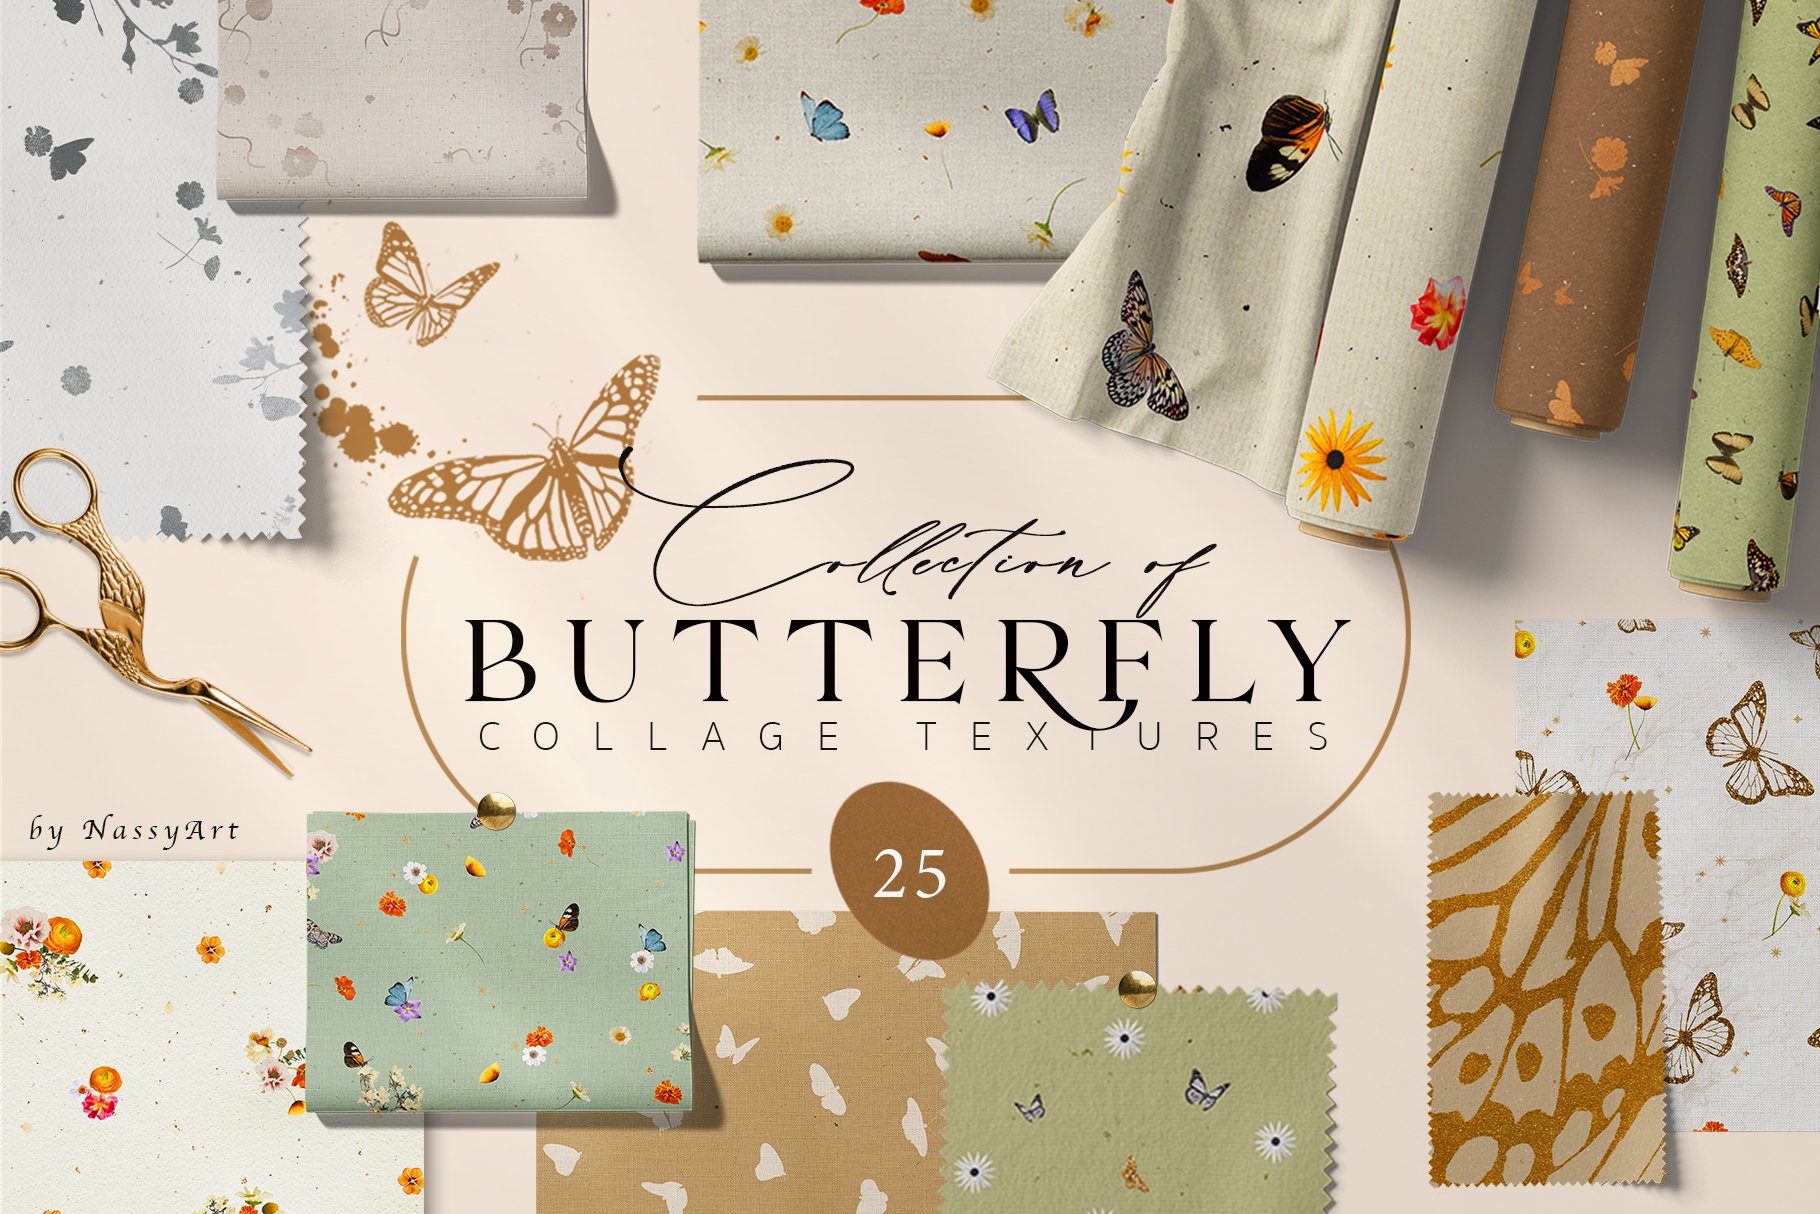 Butterfly Collage Paper Textures cover image.